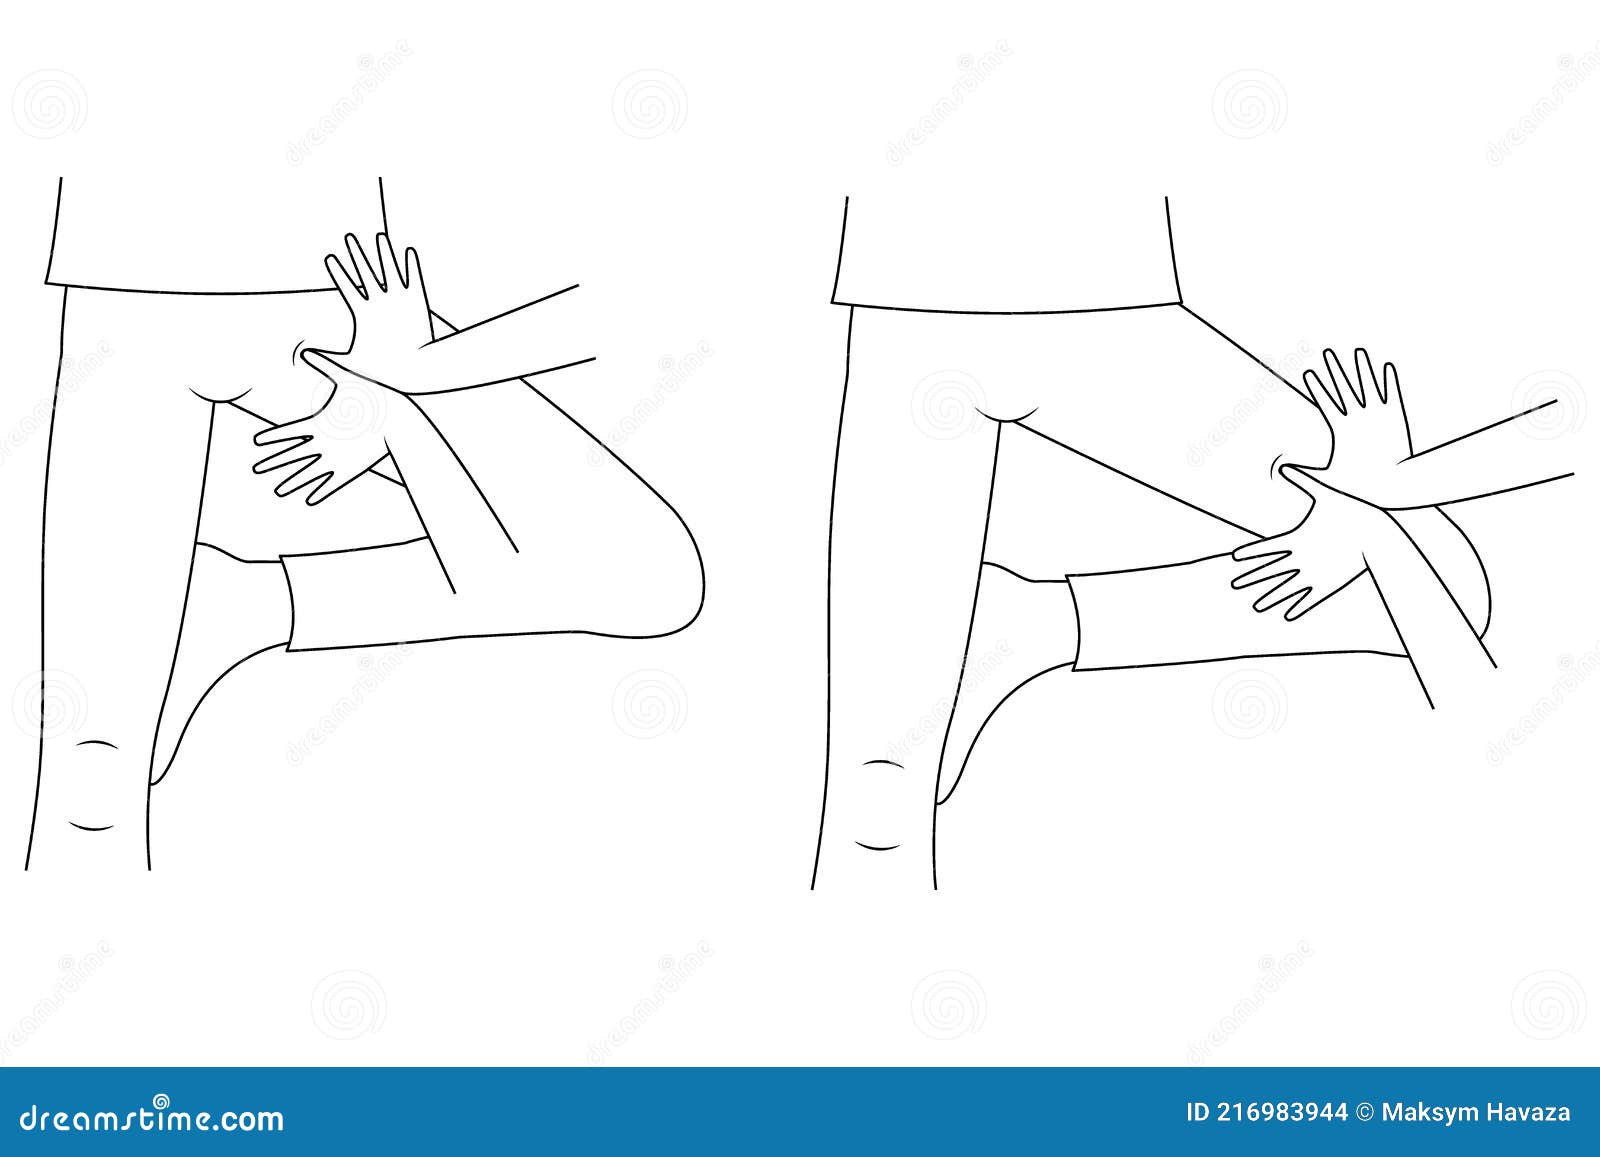 https://thumbs.dreamstime.com/z/massage-yumeiho-therapy-line-instructions-performing-techniques-kneading-inner-surface-legs-simple-vector-illustration-216983944.jpg